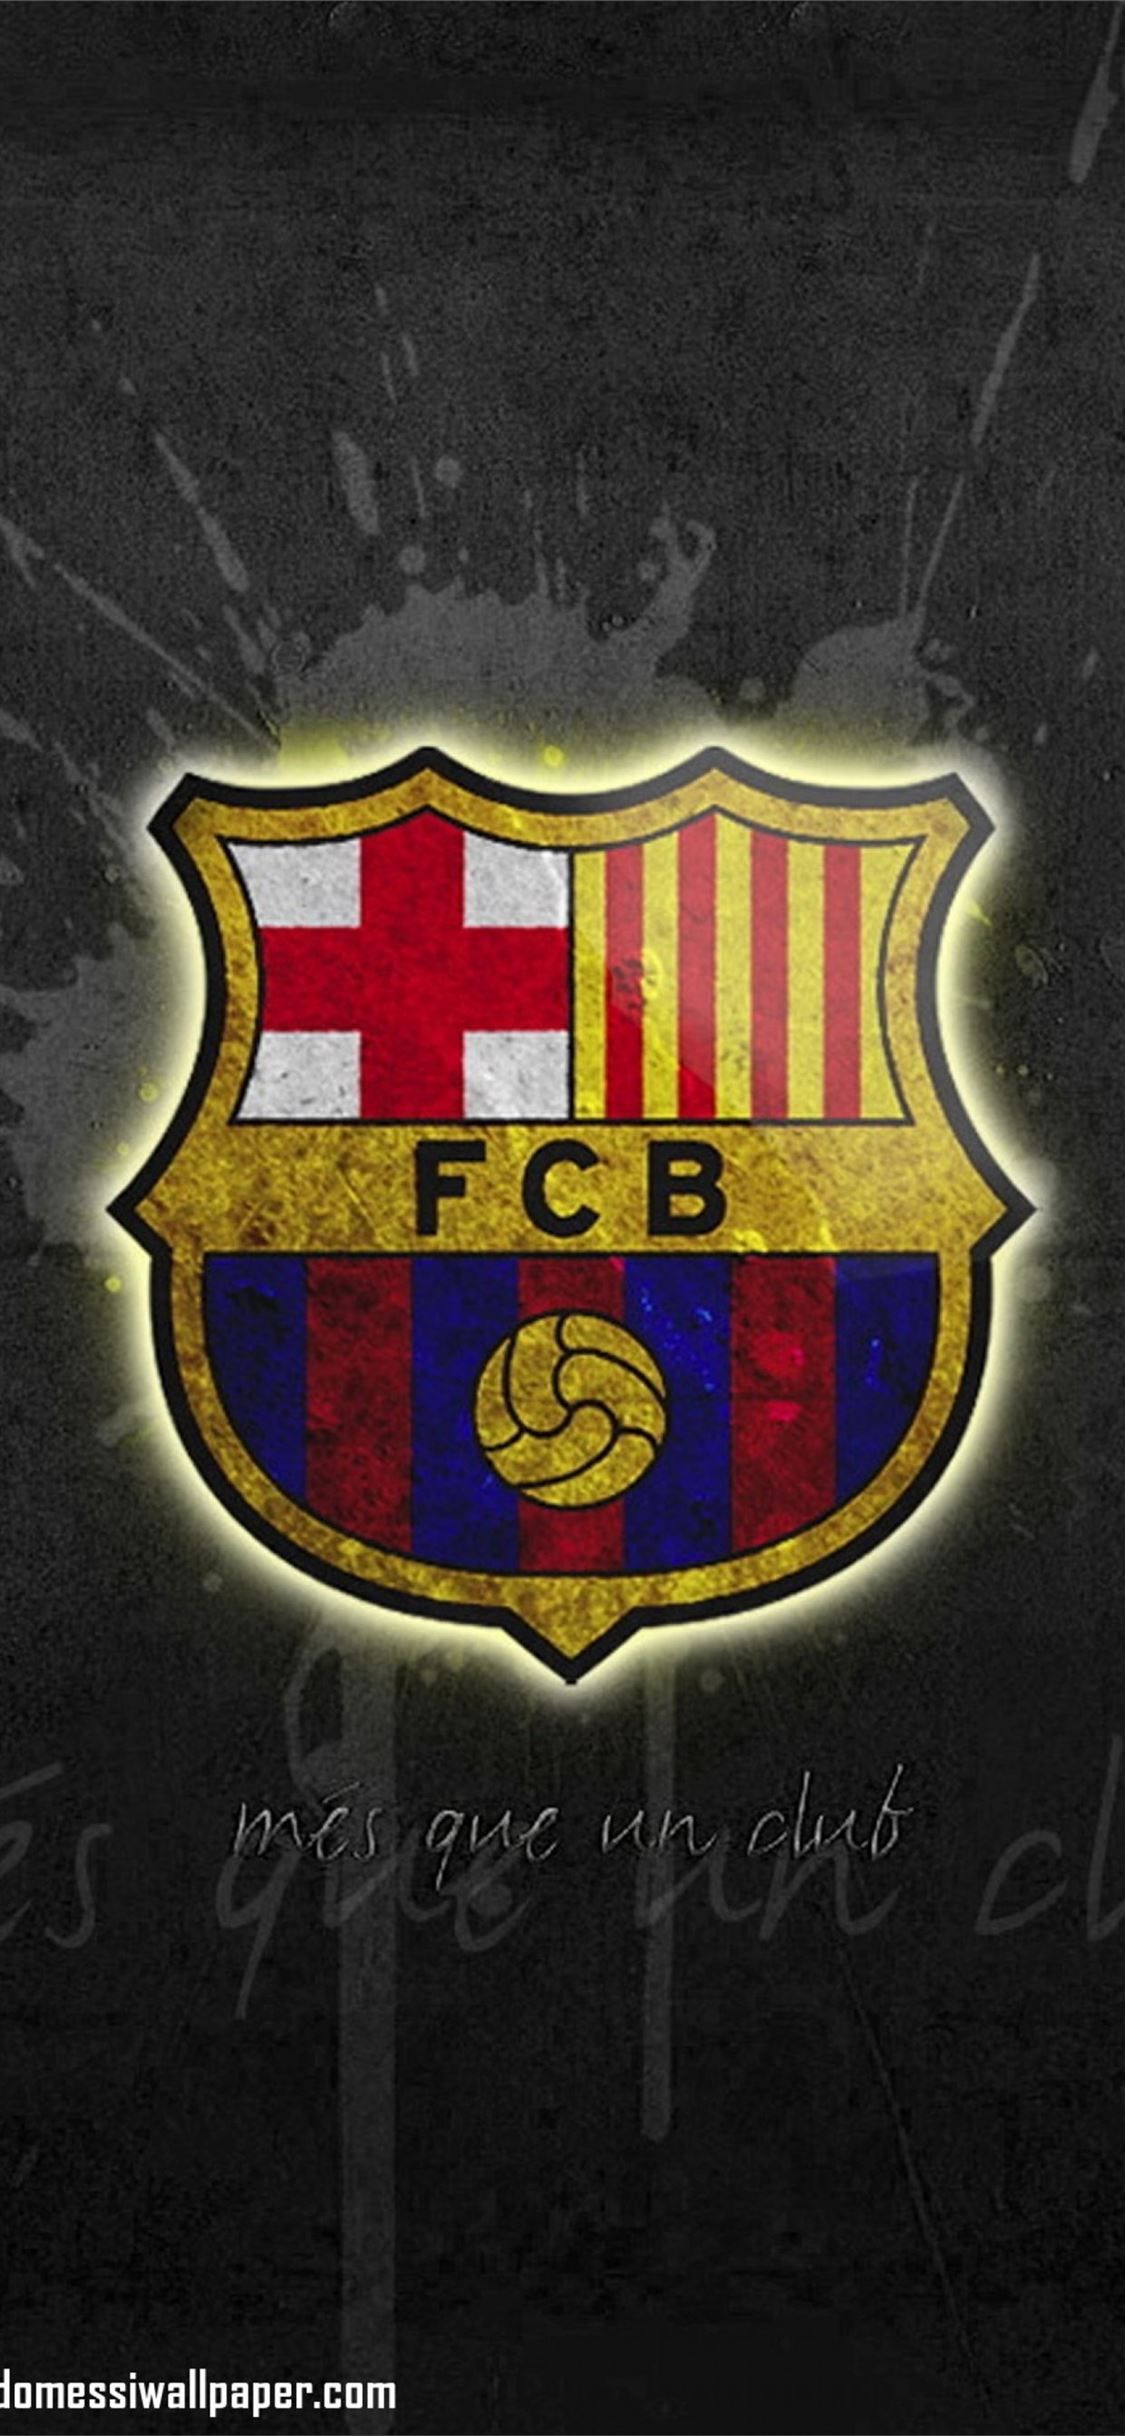 Fc Barcelona on Play iPhone X Wallpaper Free Download